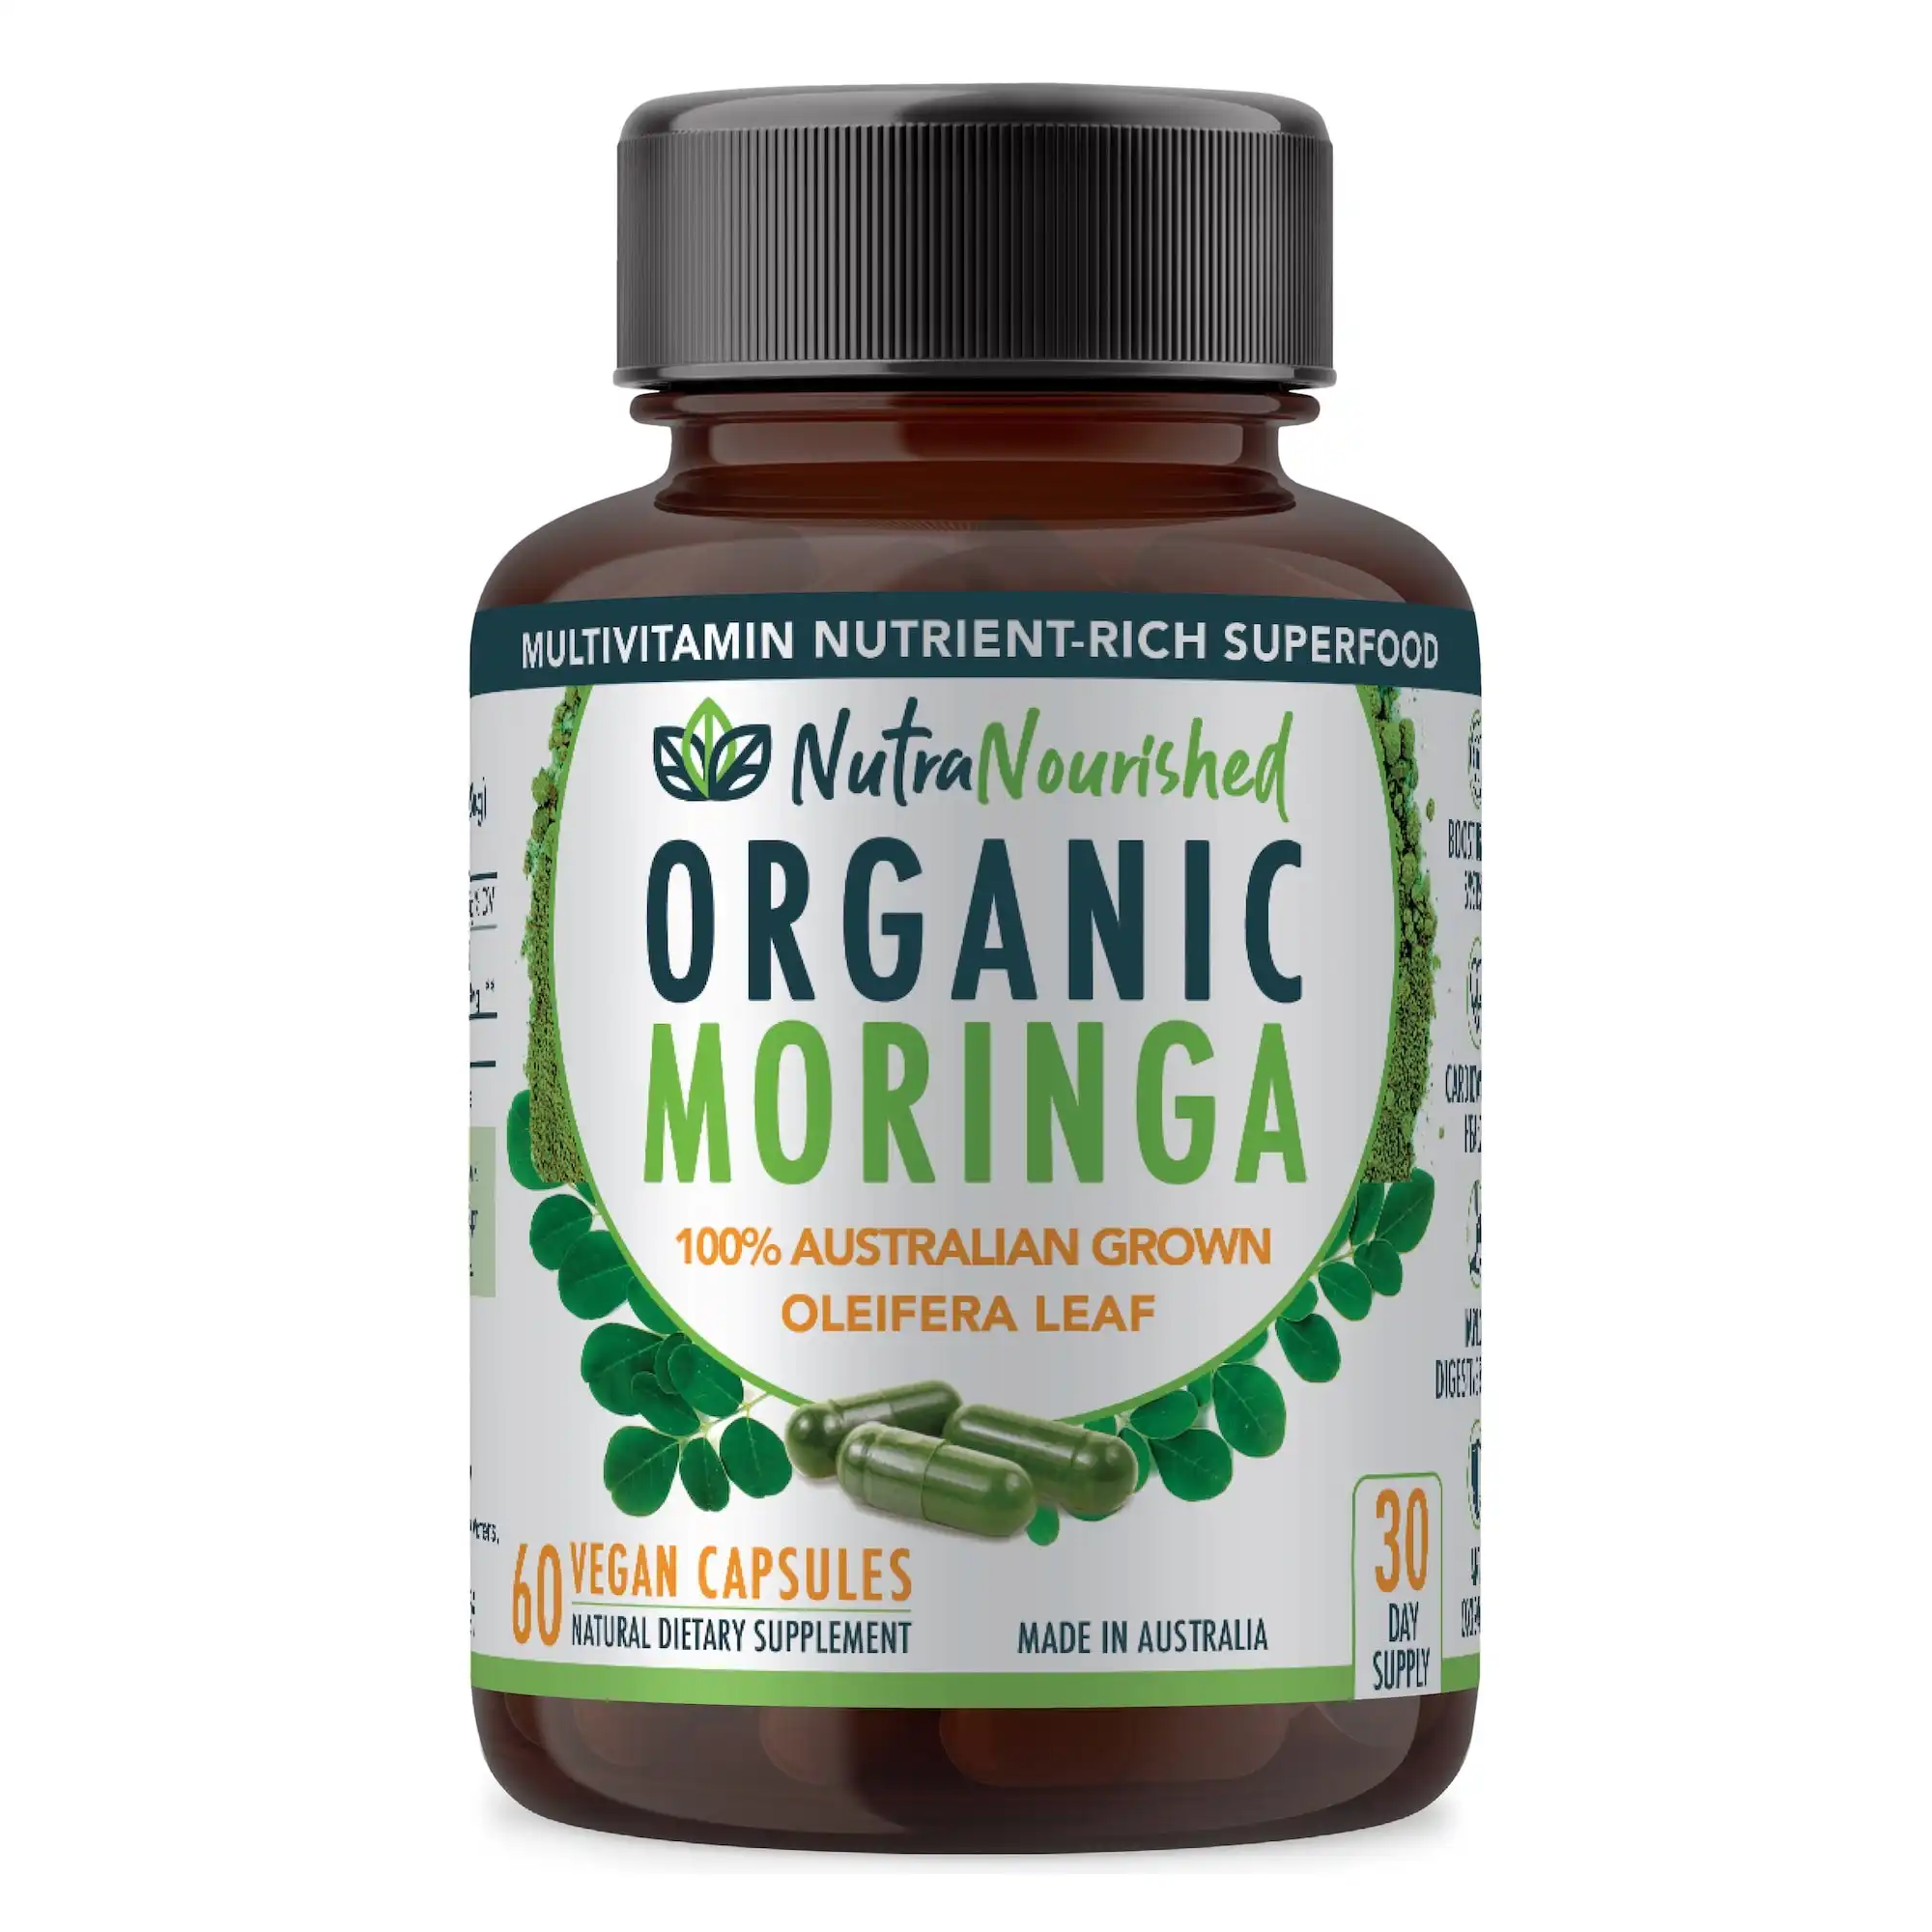 Organic Pure Moringa Leaf Capsules - 100% Natural Australian Grown  - contains 13 different vitamins & minerals